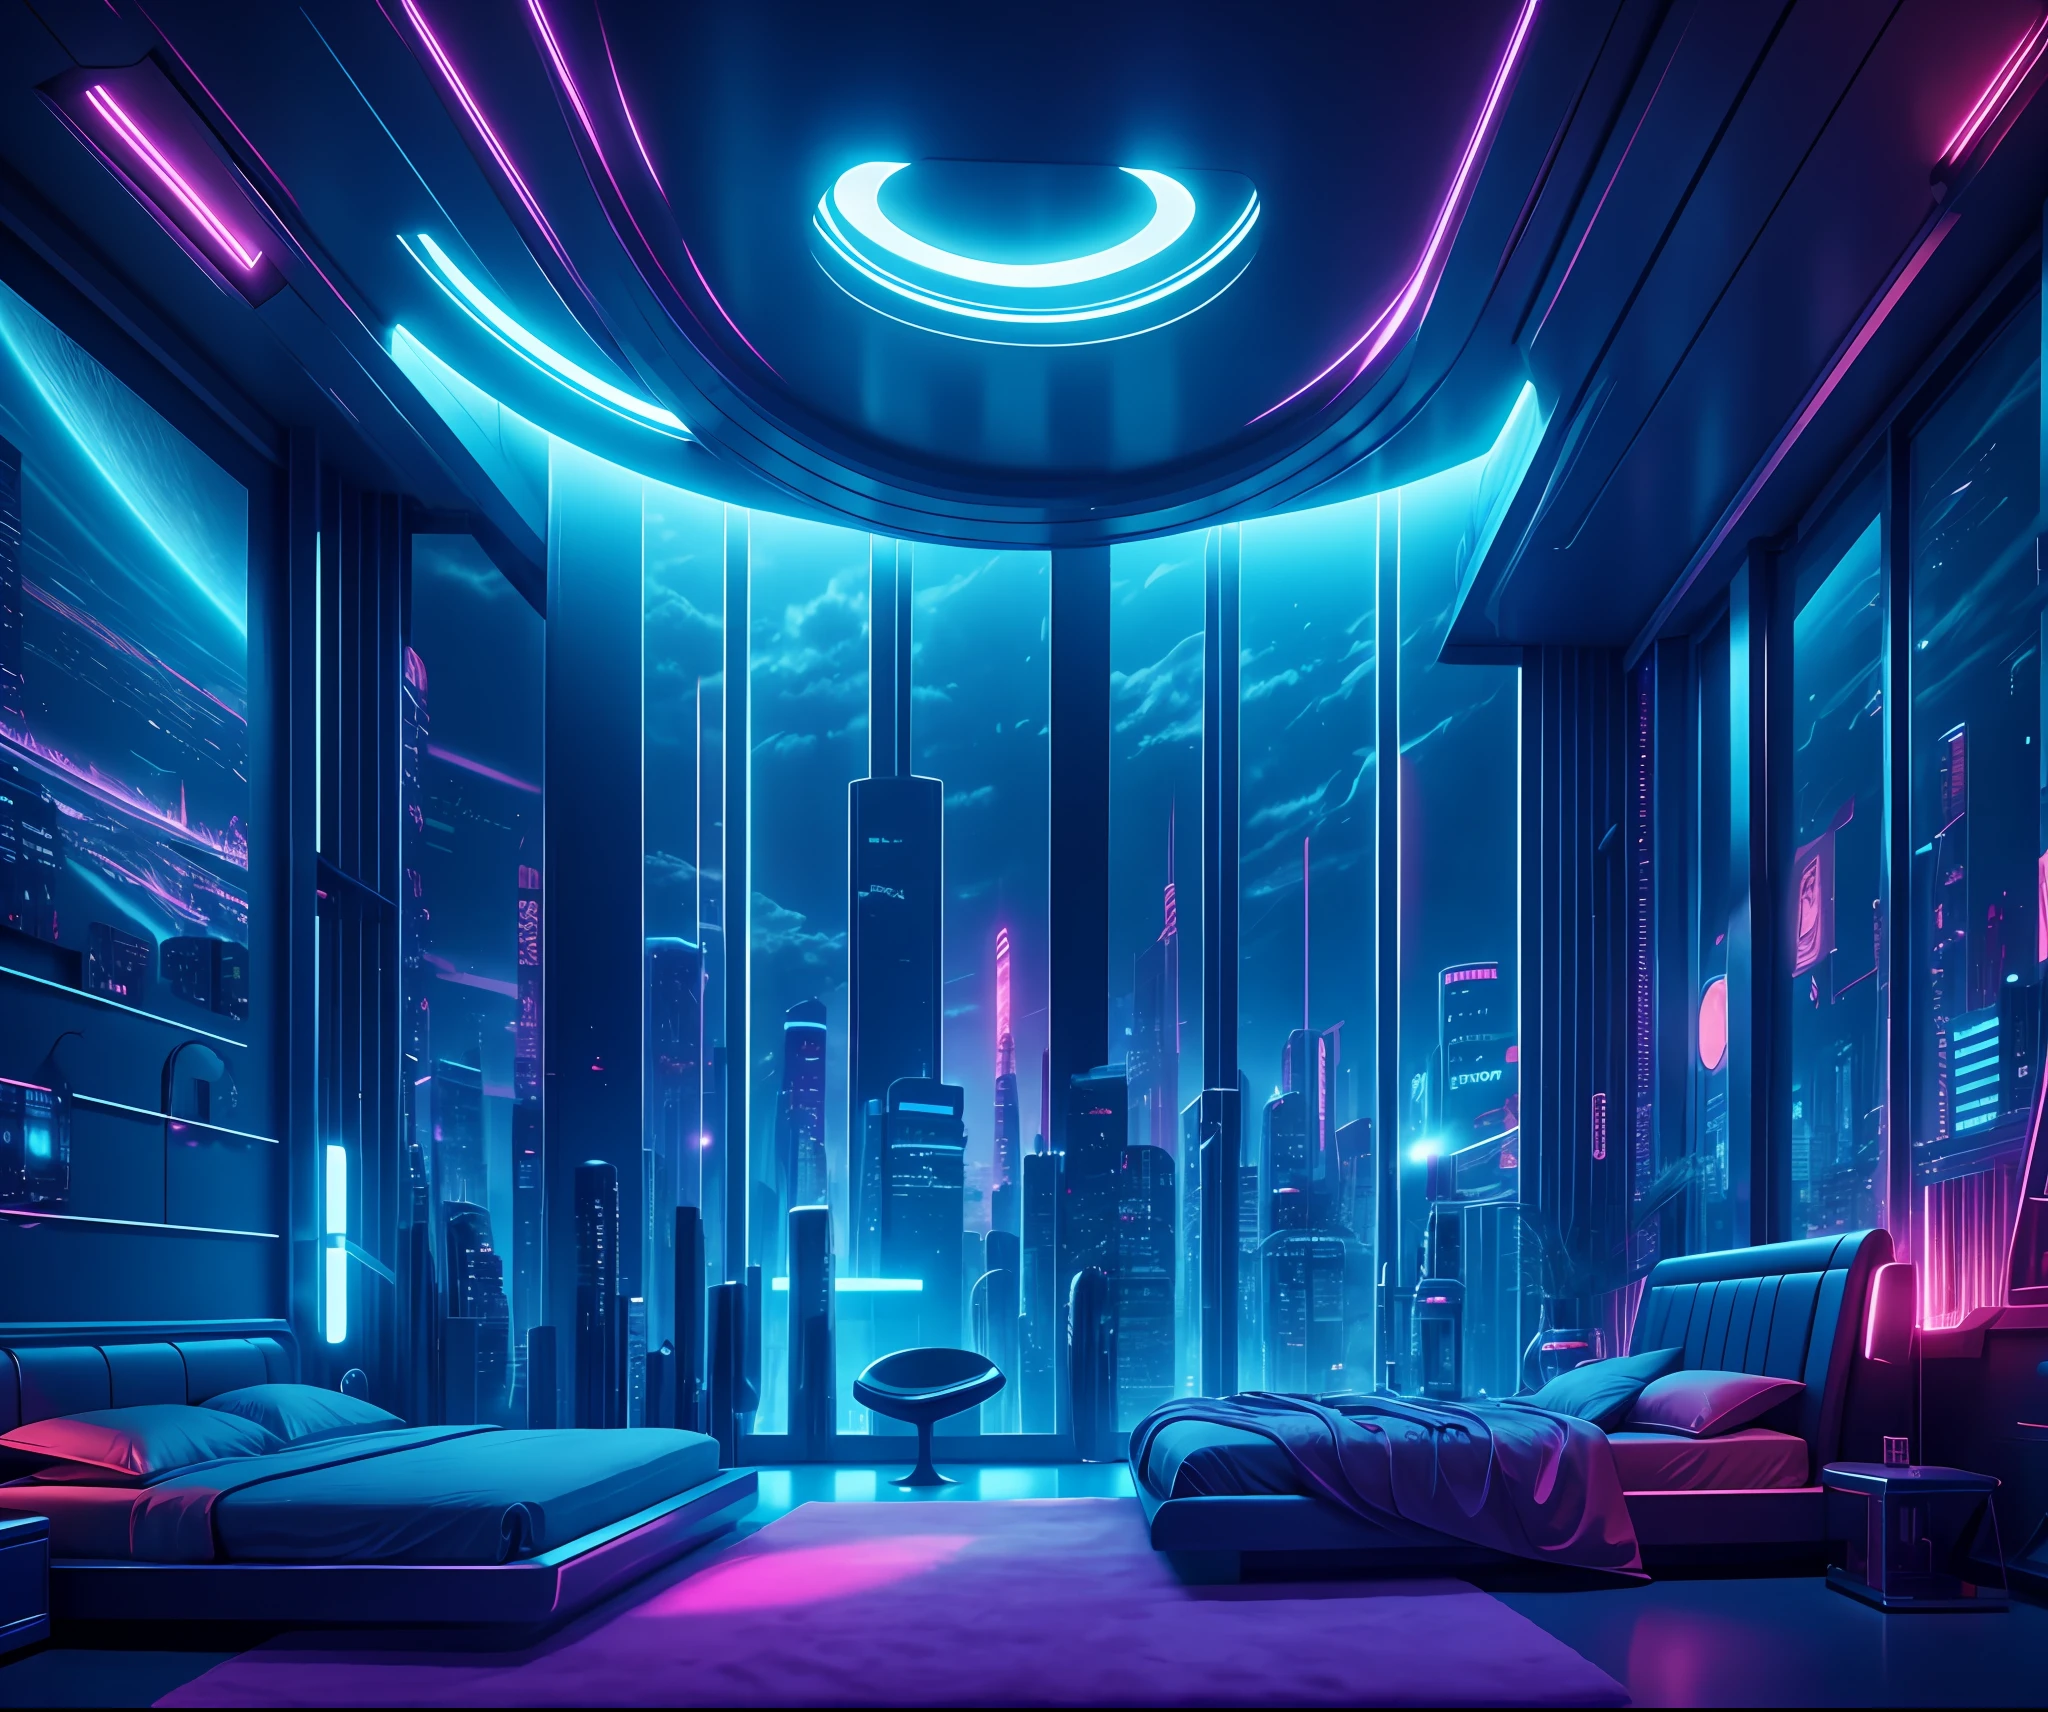 （（tmasterpiece）），（hyper-detailing），（Complicated details），（High resolution CGI artwork 8k），Image of futuristic cyberpunk bedroom。One of the walls should have a large window，There's a busy one above、extremely colorful、Detailed cyberpunk cityscape。Futuristic style，There are many colors and LED lights。The cityscape should be very detailed，depth of fields。Create depth with atmospheric lighting，Evoke the feeling of a busy futuristic city outside the window。Extremely sci-fi interior，Pay close attention to facial details，Such as complex、Hire eyes and bedroom accents。cameras：Wide-angle lens showing rooms and windows。The window should be the focal point of the image。illuminating：Use atmospheric and volumetric lighting to enhance cityscape detail。The room should be illuminated by the neon lights of the cityscape。